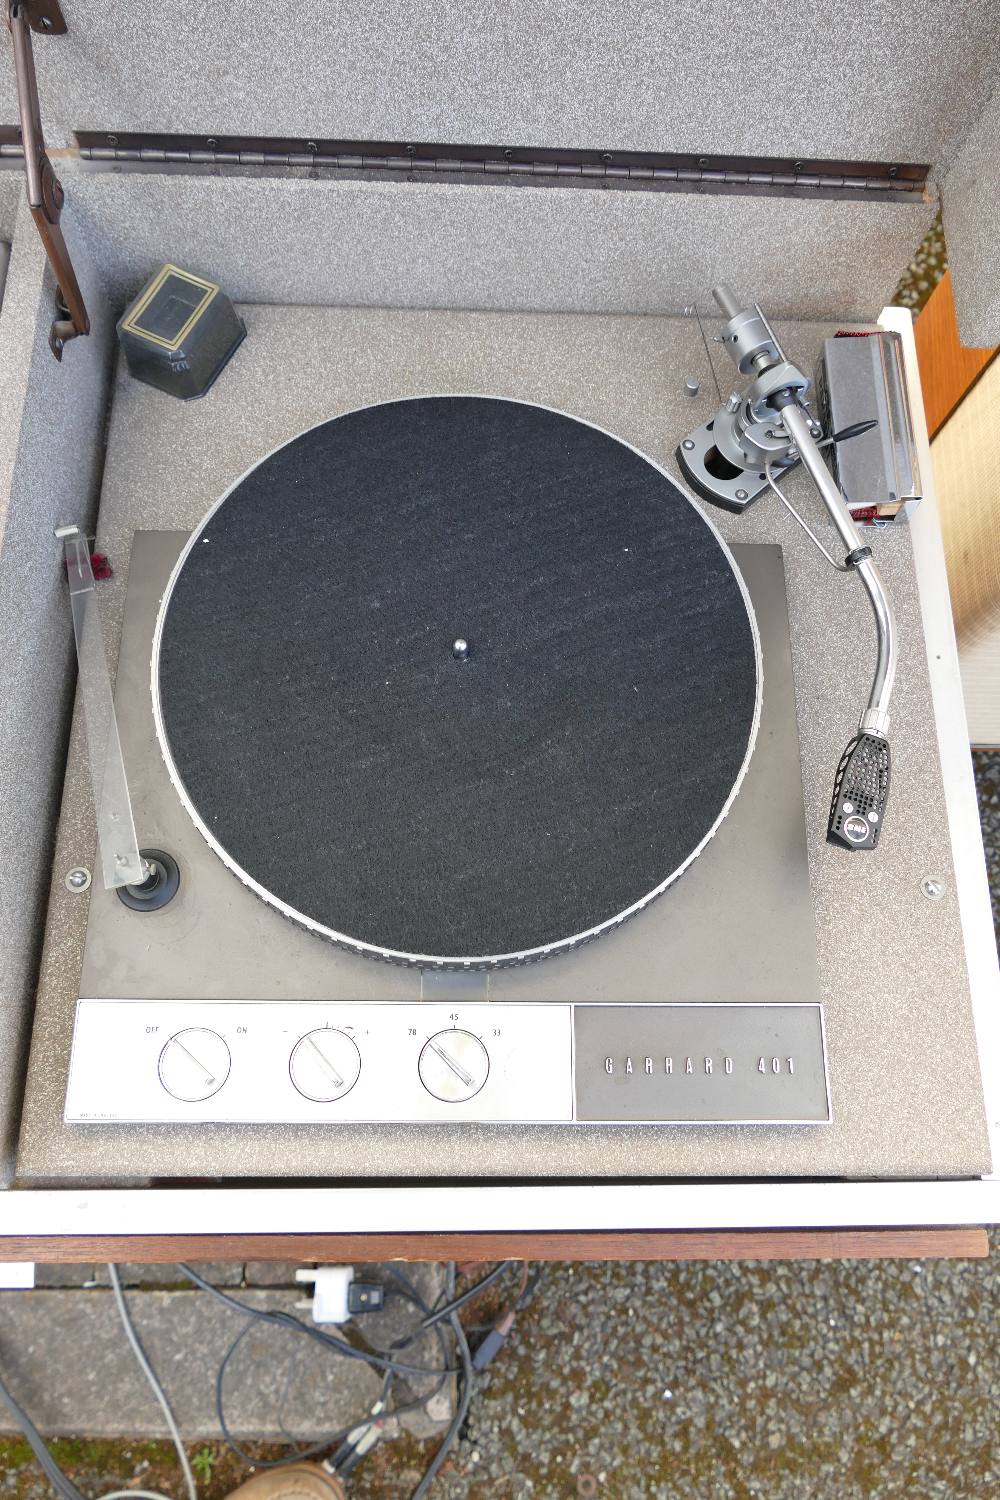 Vintage Hifi Equipment Stereogram including Garrard 401 turntable fitted with SME tonearm (Sme - Image 12 of 12